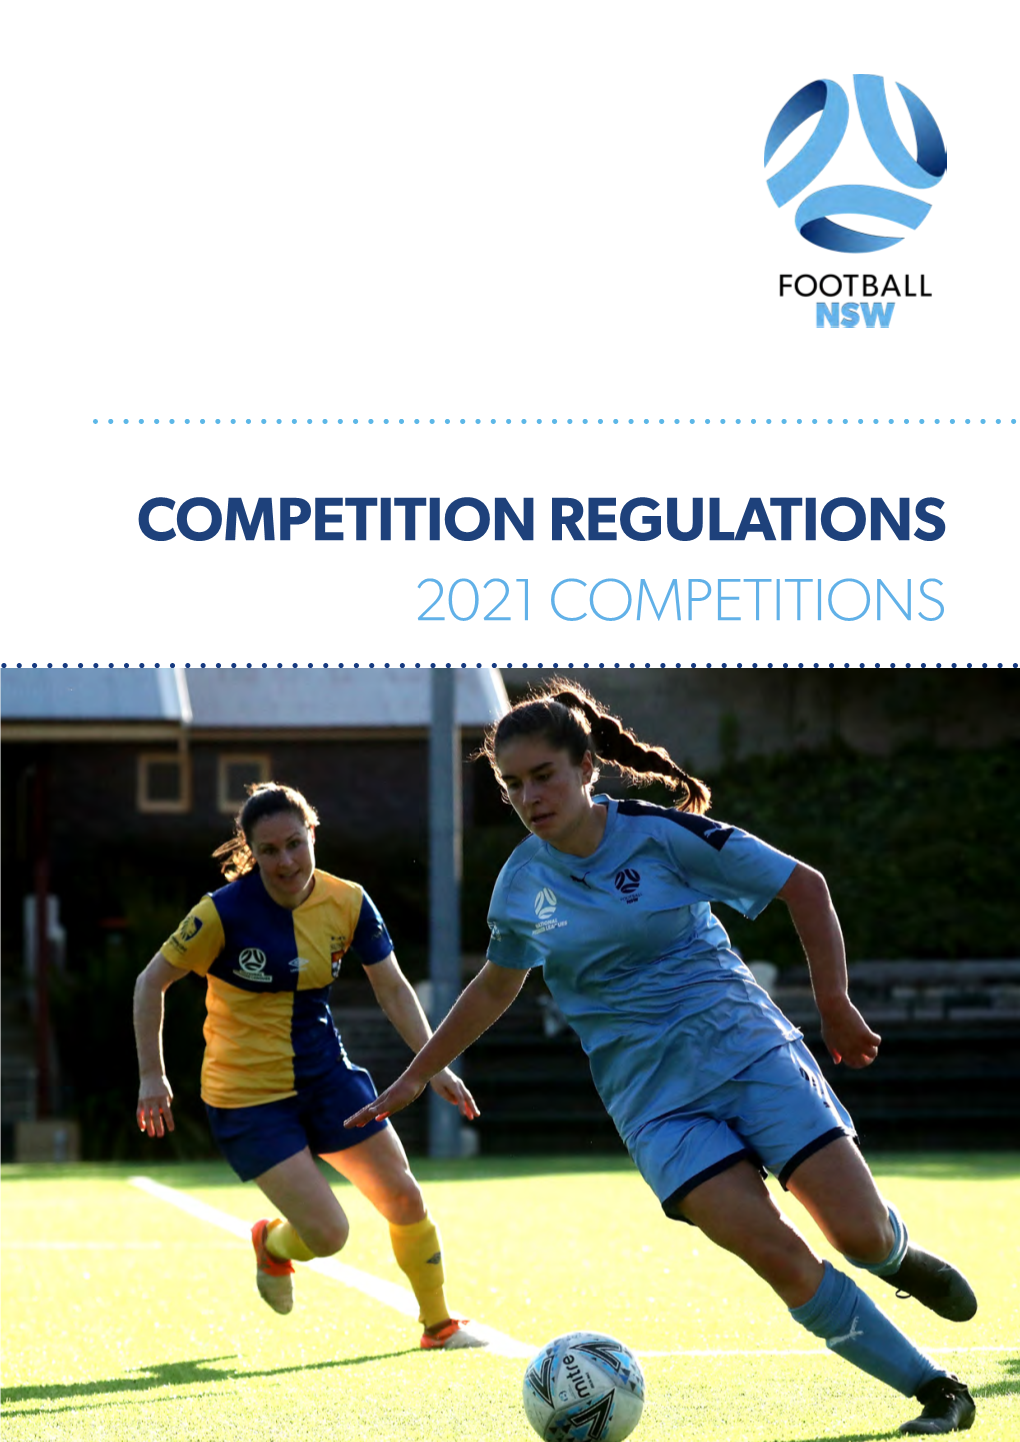 2021 Football NSW Competition Regulations